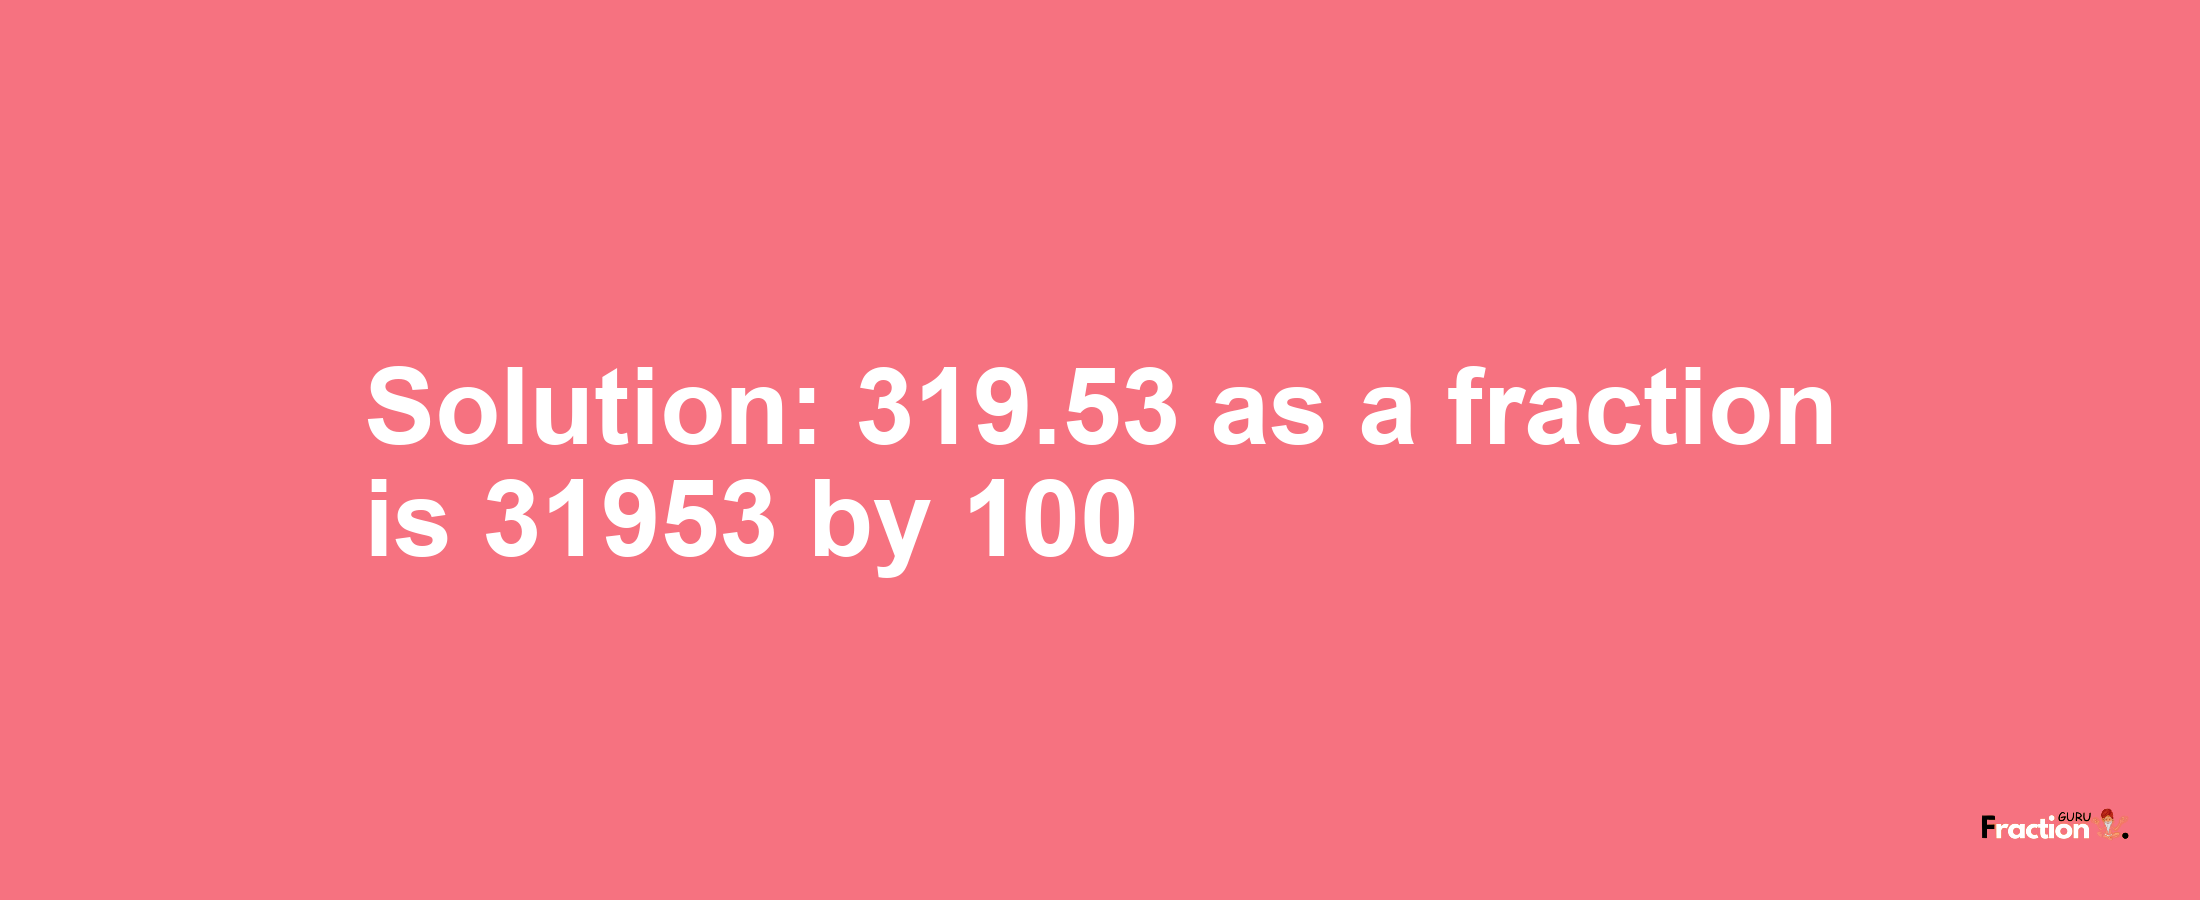 Solution:319.53 as a fraction is 31953/100